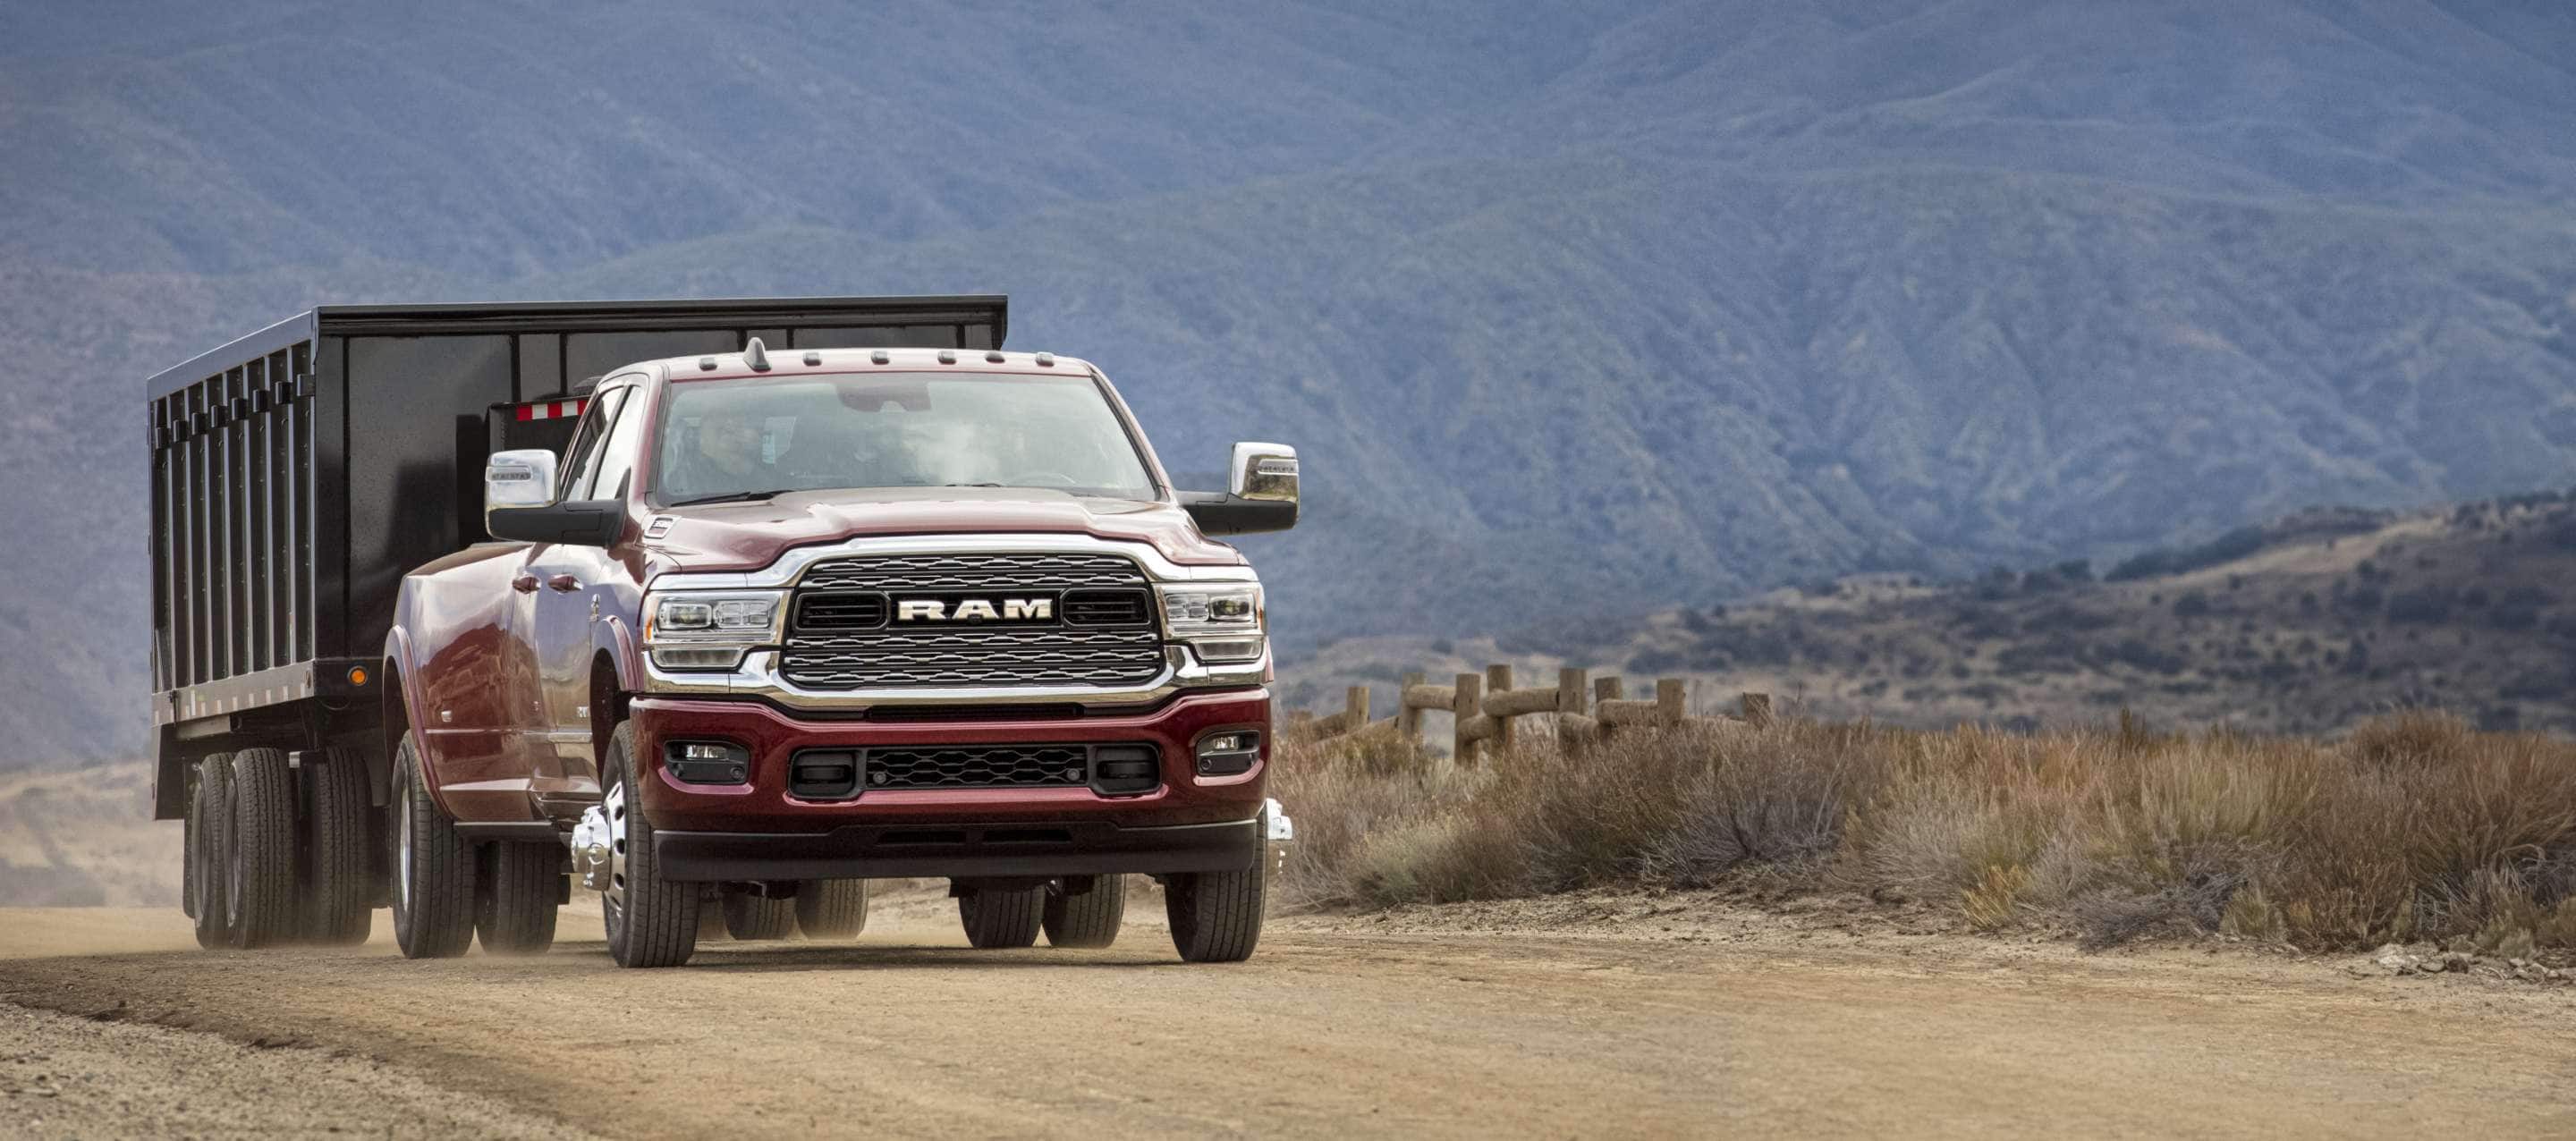 A red 2023 Ram 3500 Limited 4x4 Crew Cab as it is driven on a dirt road towing a dump body trailer, with mountains in the background.